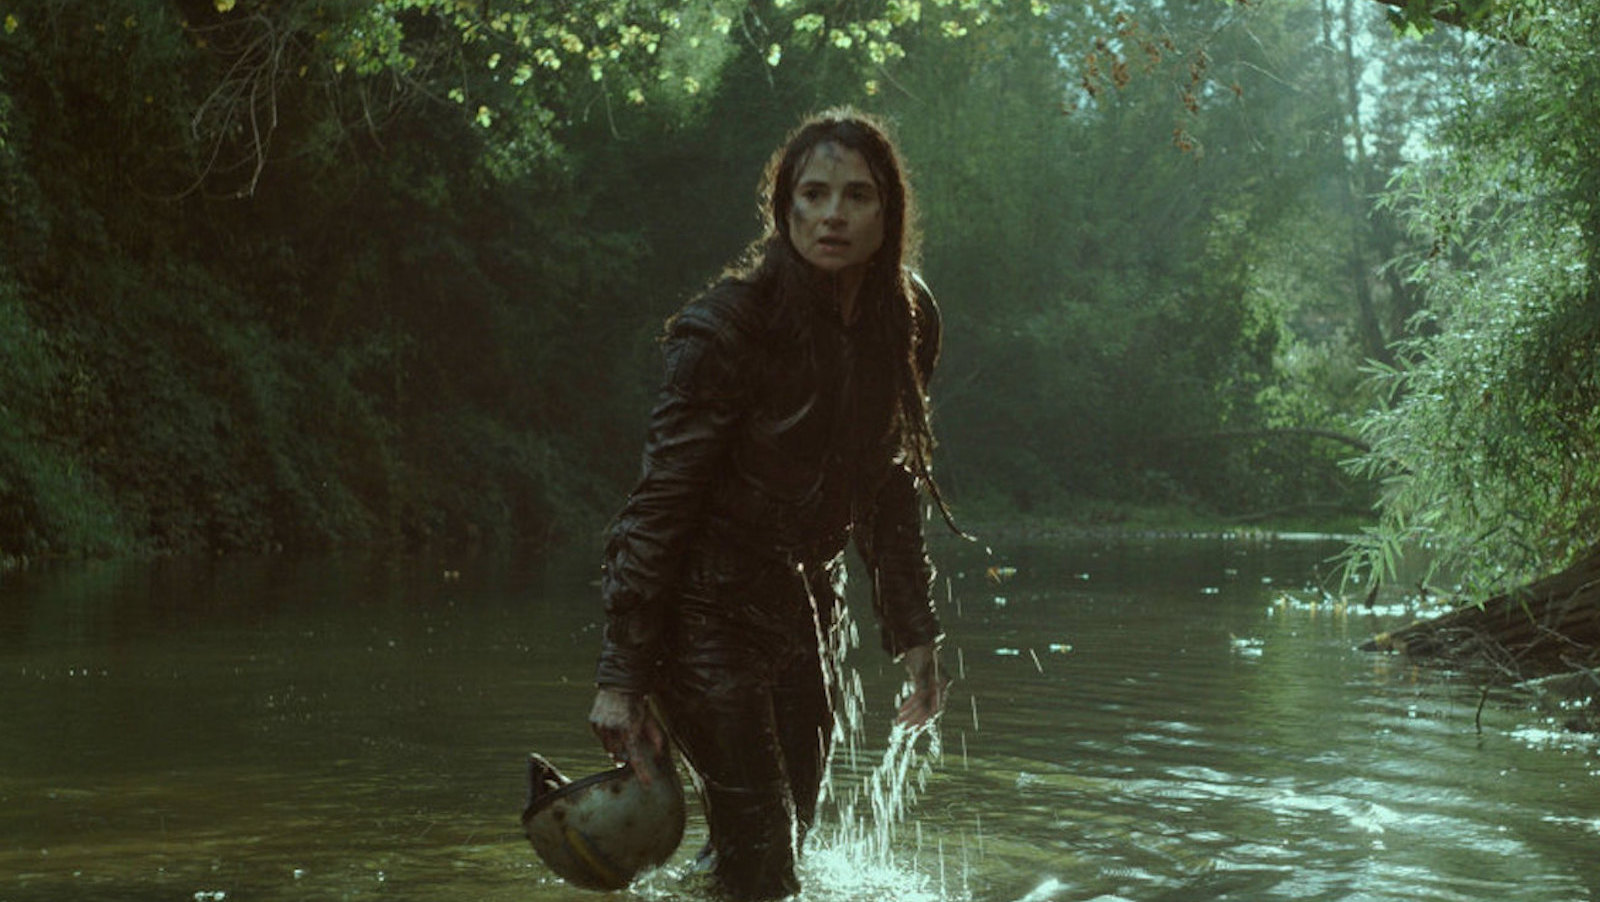 A long-haired woman carrying a helmet stands up to her knees in a river surrounded by woods